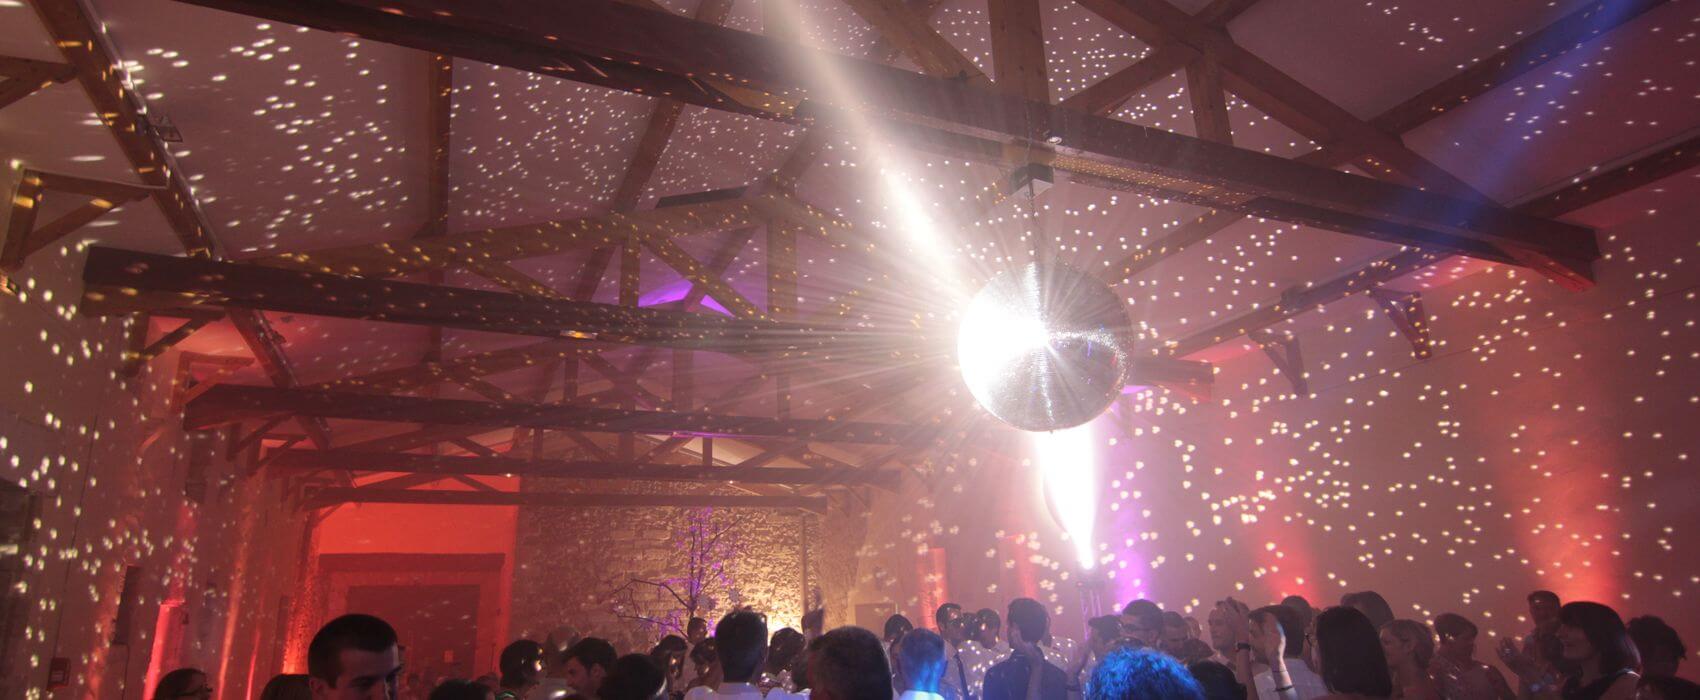 Sound system and entertainment for weddings and birthdays in Provence